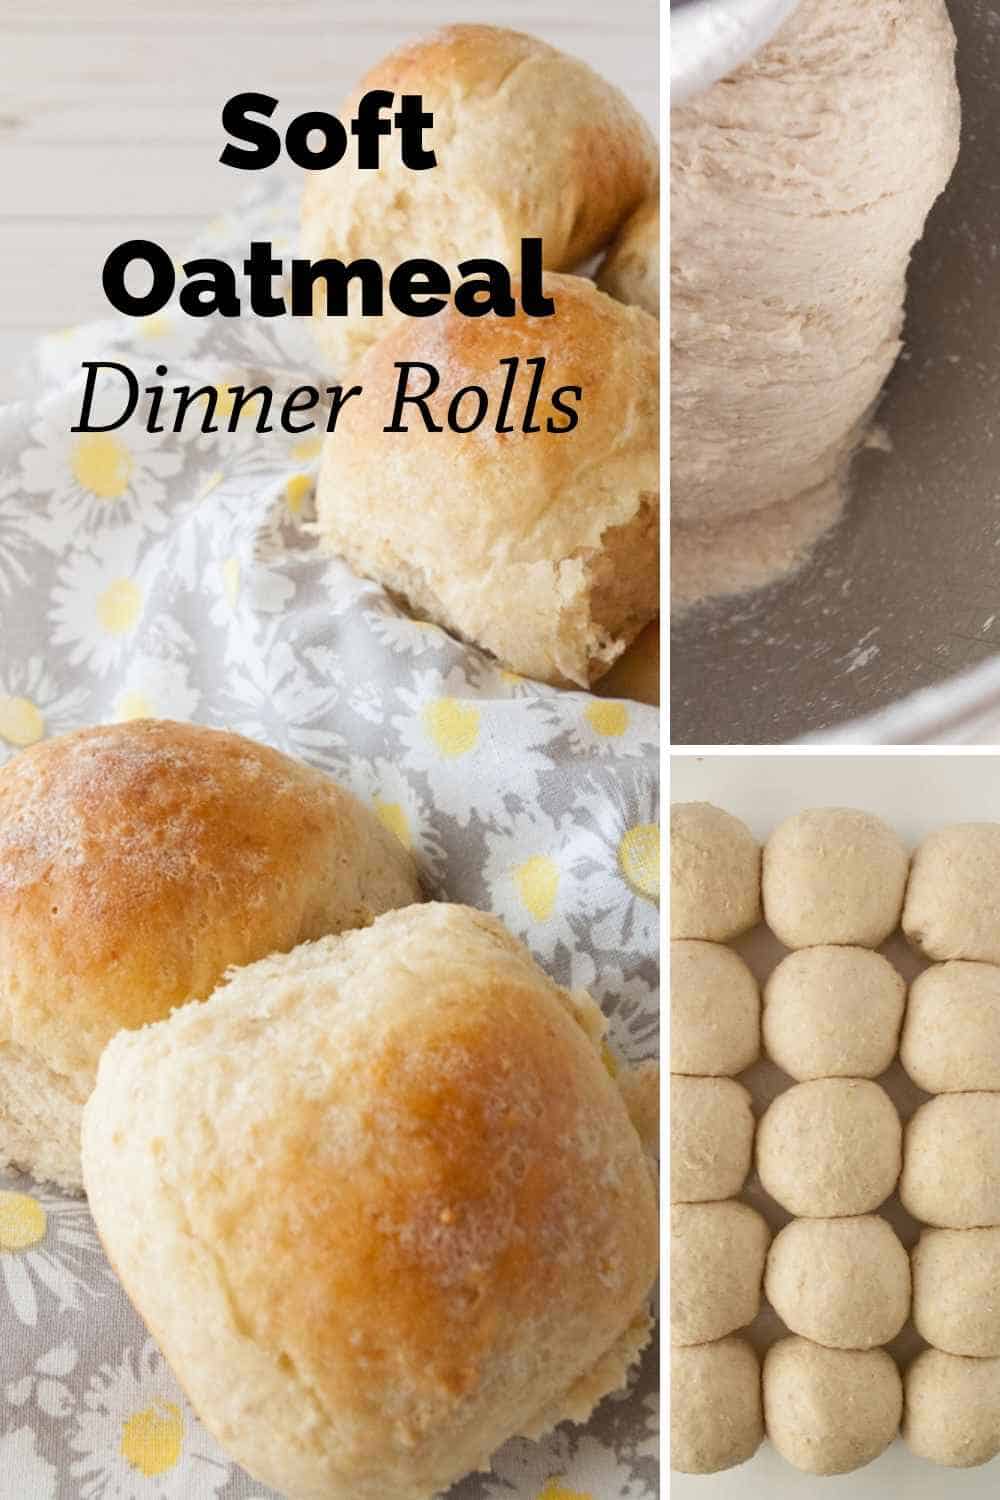 Soft Oatmeal Dinner Rolls - Mindee's Cooking Obsession